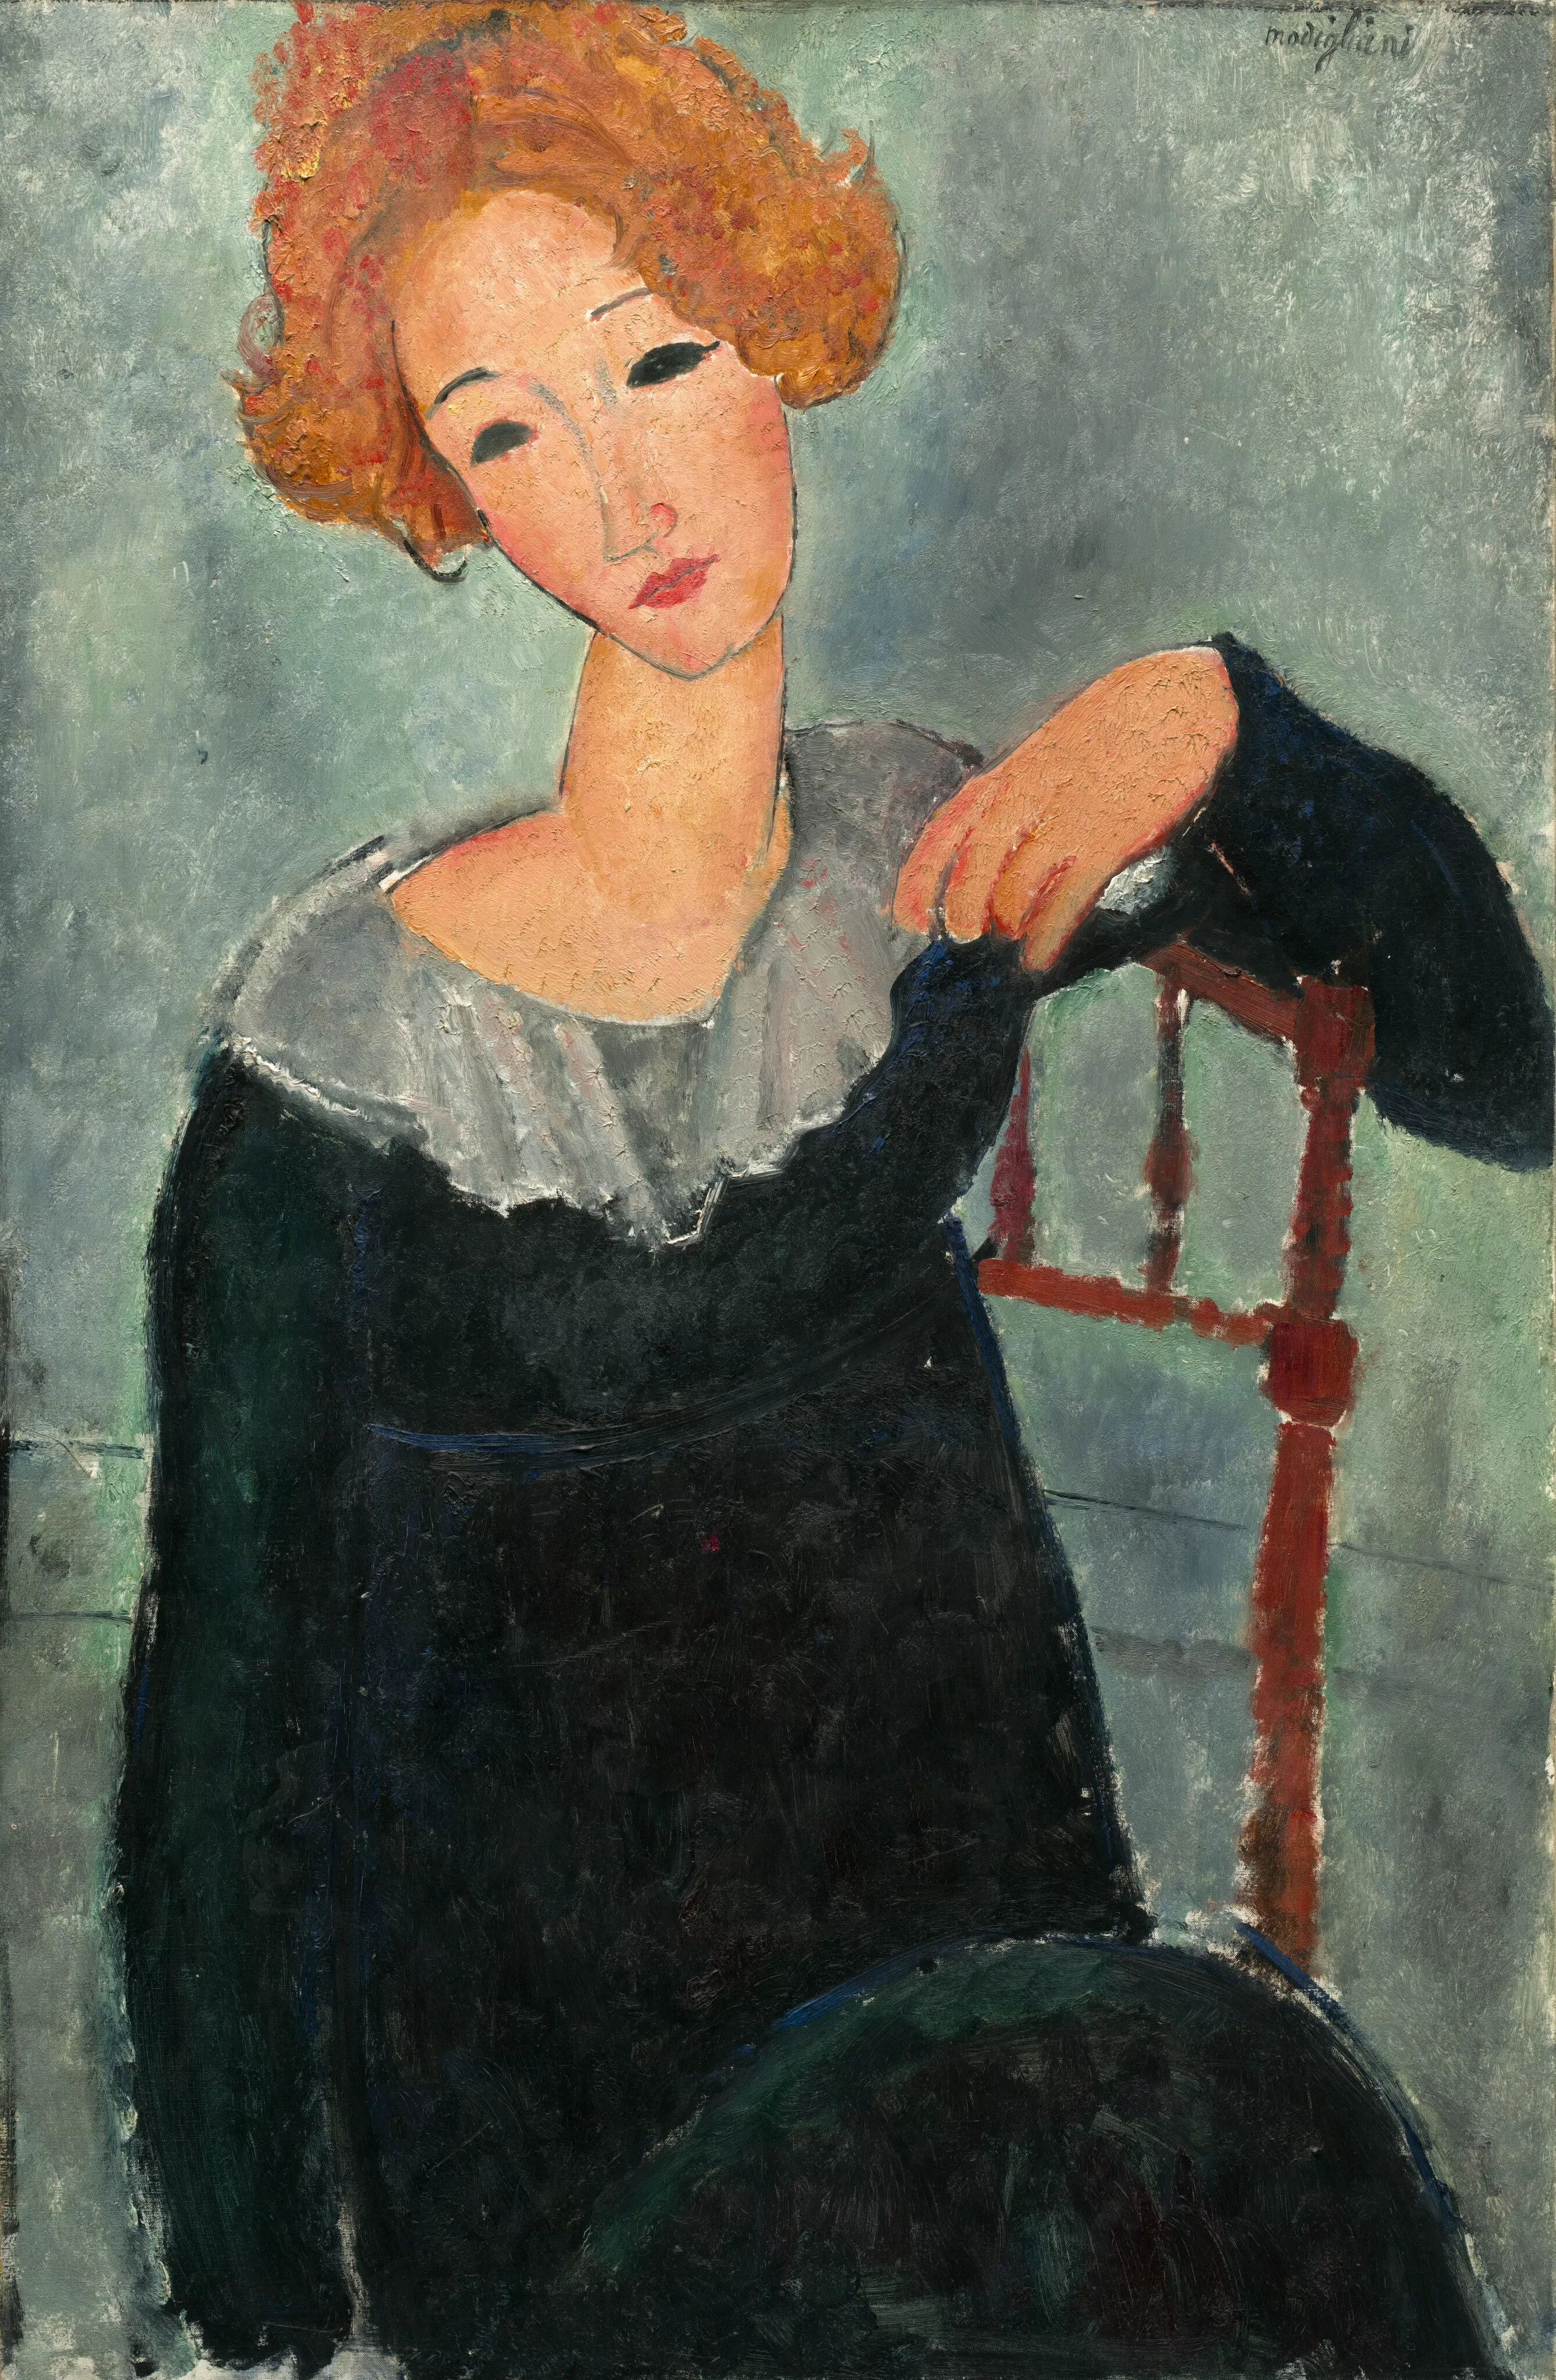 Woman with Red Hair, Amedeo Modigliani